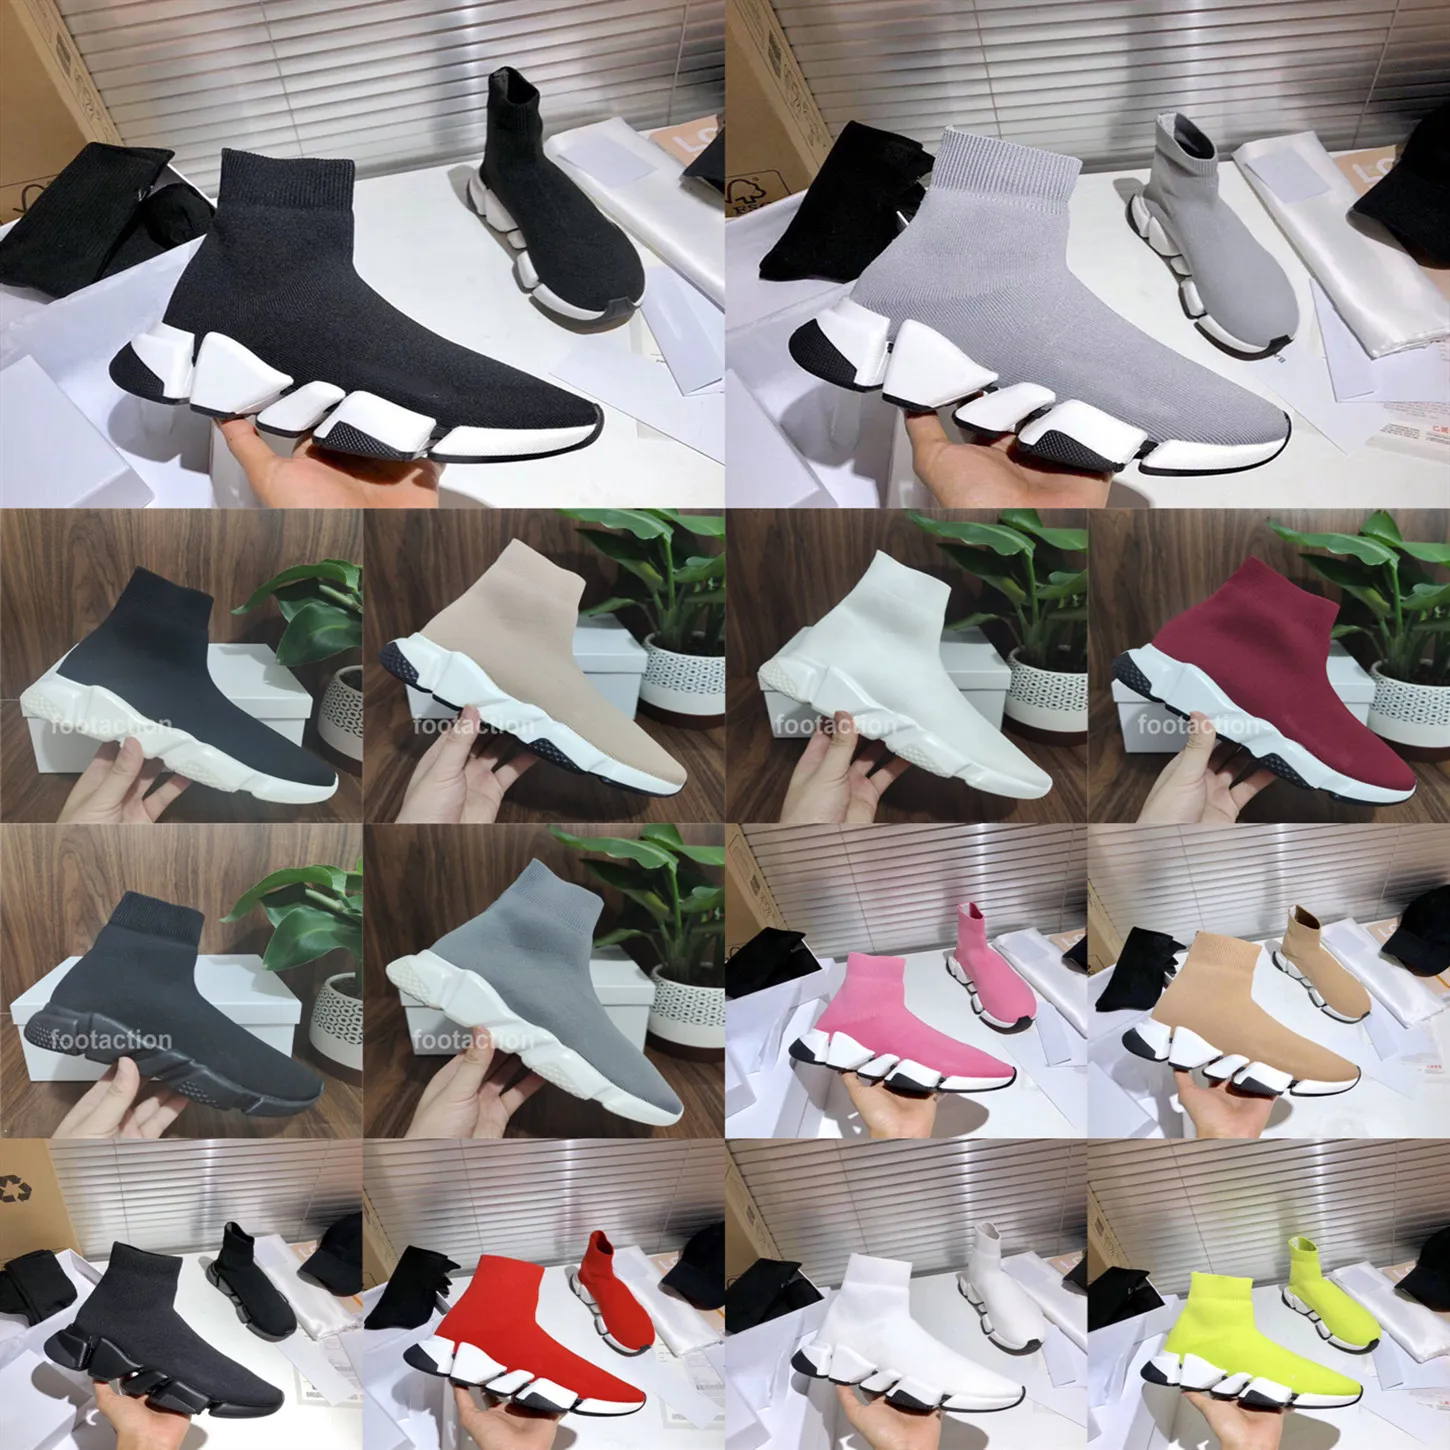 Chaussures Men Men Casuary Shoes Sneakers Sock Speed 2.0トレーナーブーツPOUR HOMMES ET FEMMES BASKETS ZAPATILLAS DESIGNSトリプルブラックホワイト付き